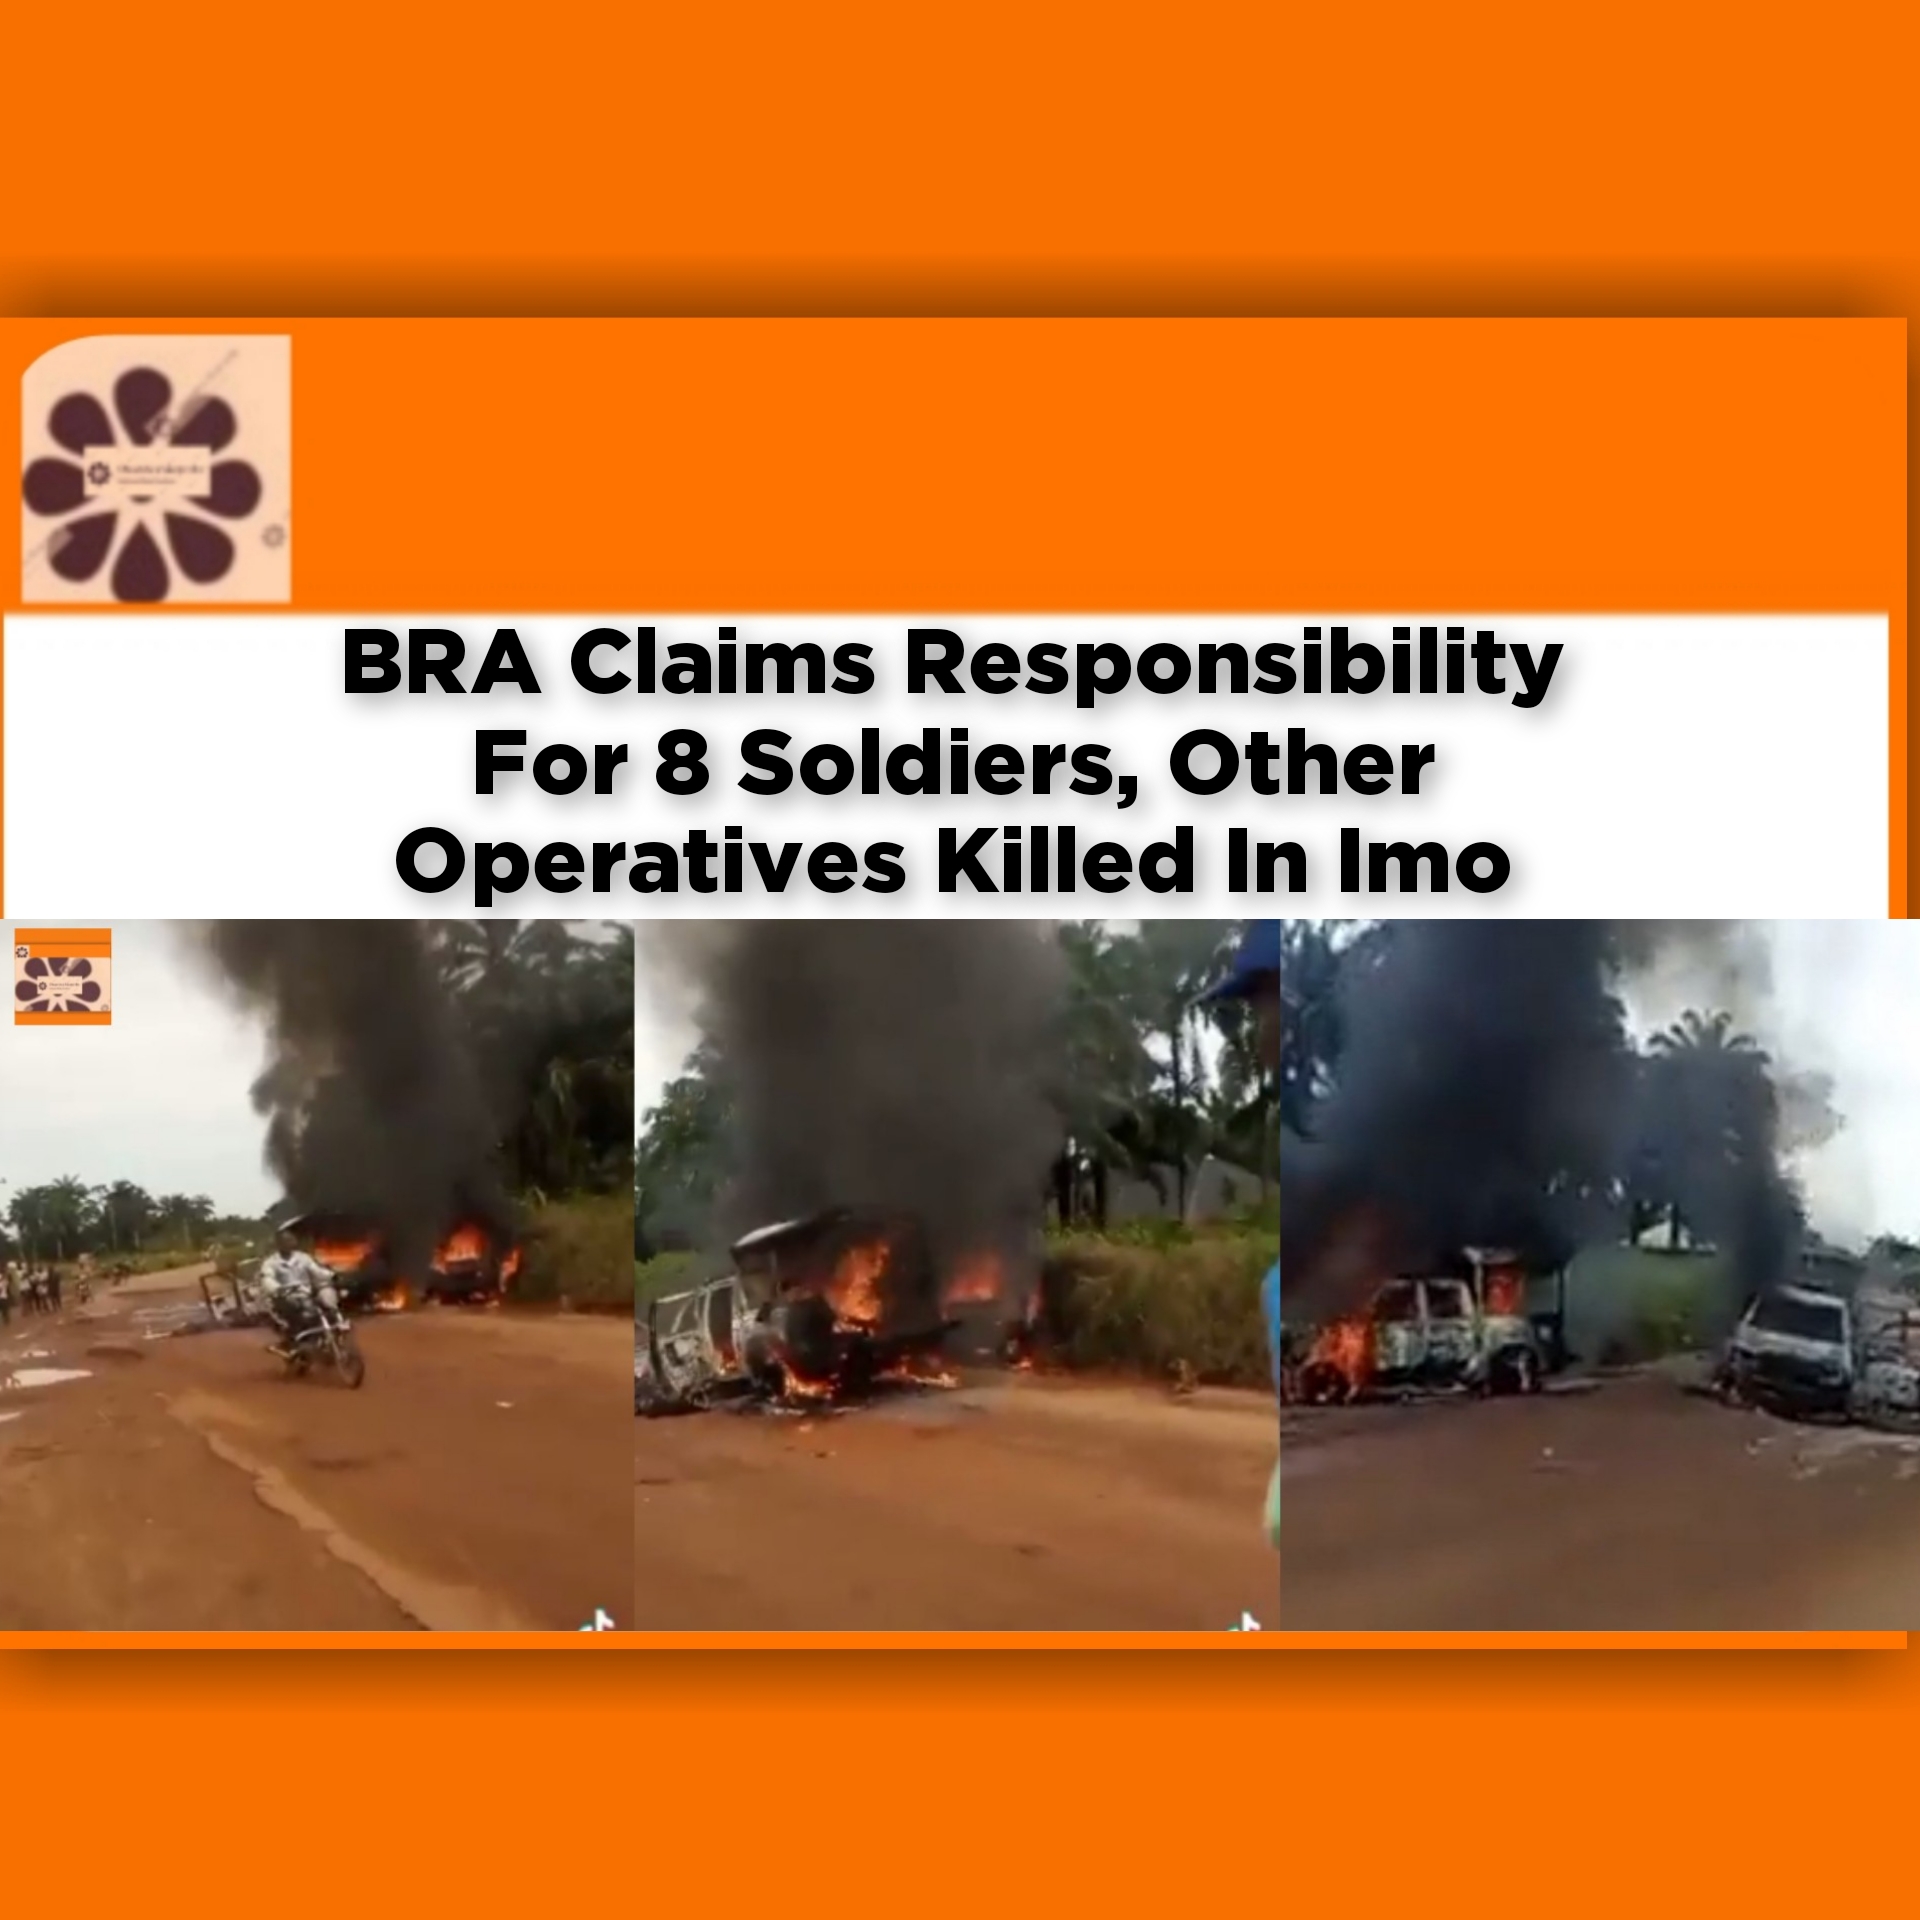 BRA Claims Responsibility For 8 Soldiers, Other Operatives Killed In Imo ~ OsazuwaAkonedo #Accountant